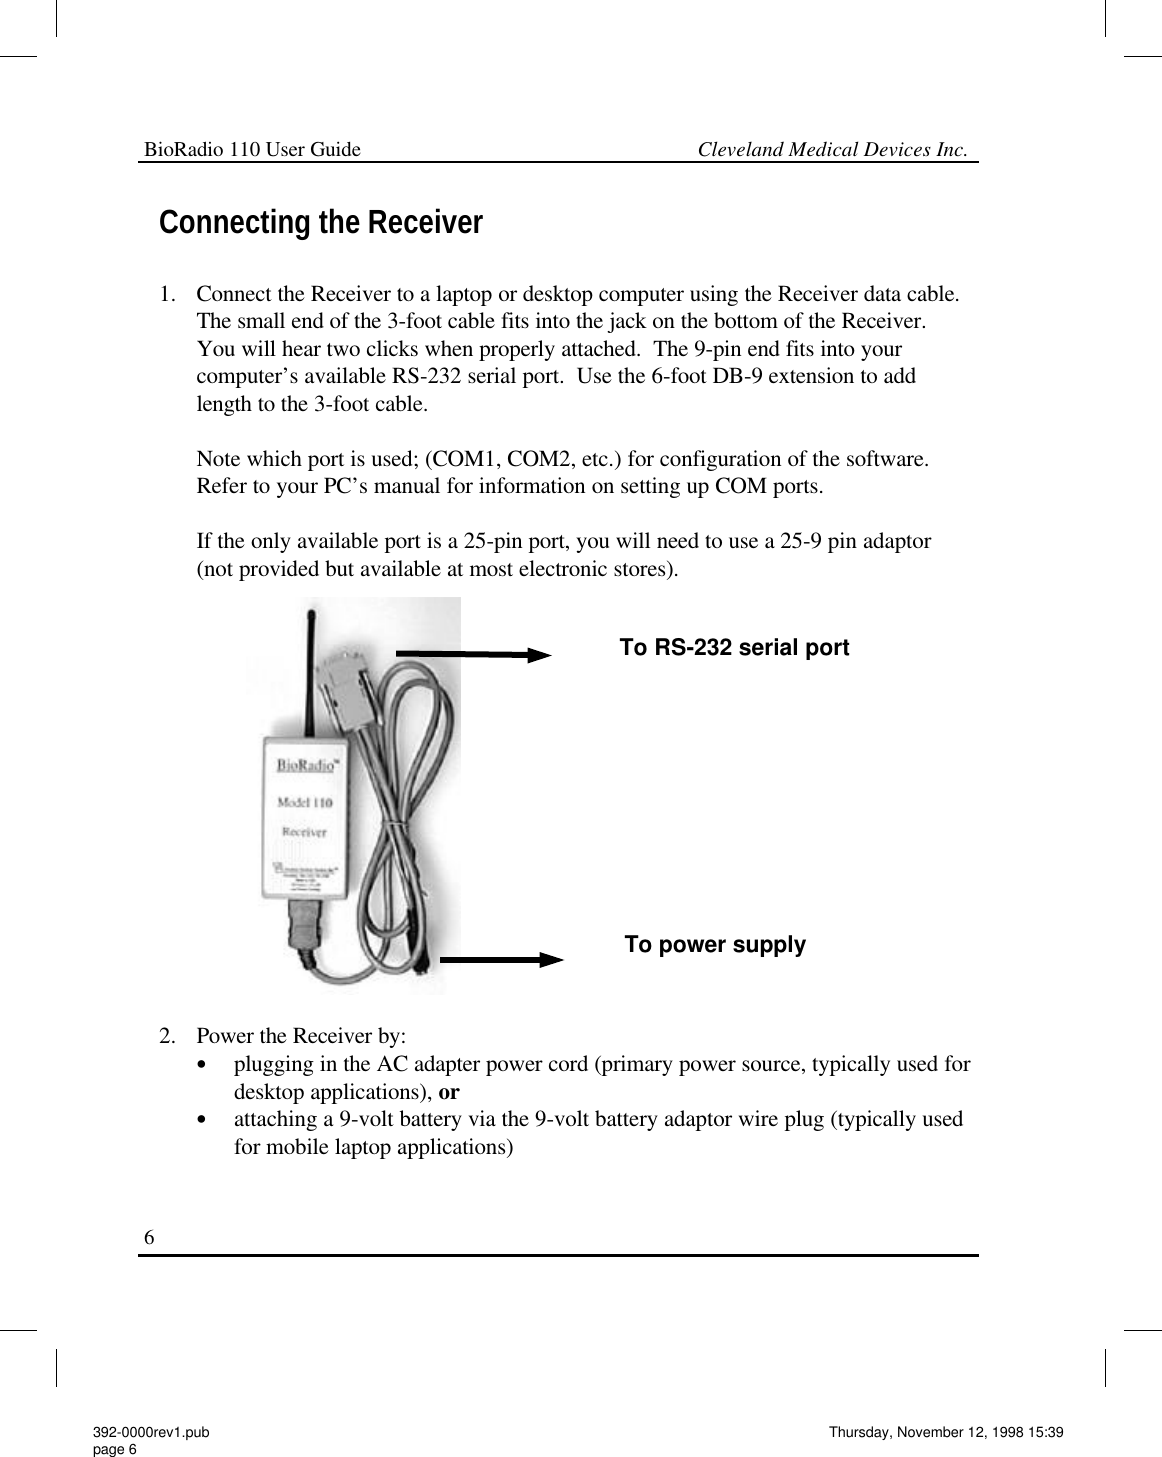 BioRadio 110 User Guide                                                             Cleveland Medical Devices Inc.6 Connecting the Receiver  1. Connect the Receiver to a laptop or desktop computer using the Receiver data cable. The small end of the 3-foot cable fits into the jack on the bottom of the Receiver.  You will hear two clicks when properly attached.  The 9-pin end fits into your computer’s available RS-232 serial port.  Use the 6-foot DB-9 extension to add length to the 3-foot cable.  Note which port is used; (COM1, COM2, etc.) for configuration of the software.  Refer to your PC’s manual for information on setting up COM ports.  If the only available port is a 25-pin port, you will need to use a 25-9 pin adaptor (not provided but available at most electronic stores).                 2. Power the Receiver by: •plugging in the AC adapter power cord (primary power source, typically used for desktop applications), or •attaching a 9-volt battery via the 9-volt battery adaptor wire plug (typically used for mobile laptop applications) To RS-232 serial port To power supply 392-0000rev1.pub page 6 Thursday, November 12, 1998 15:39 